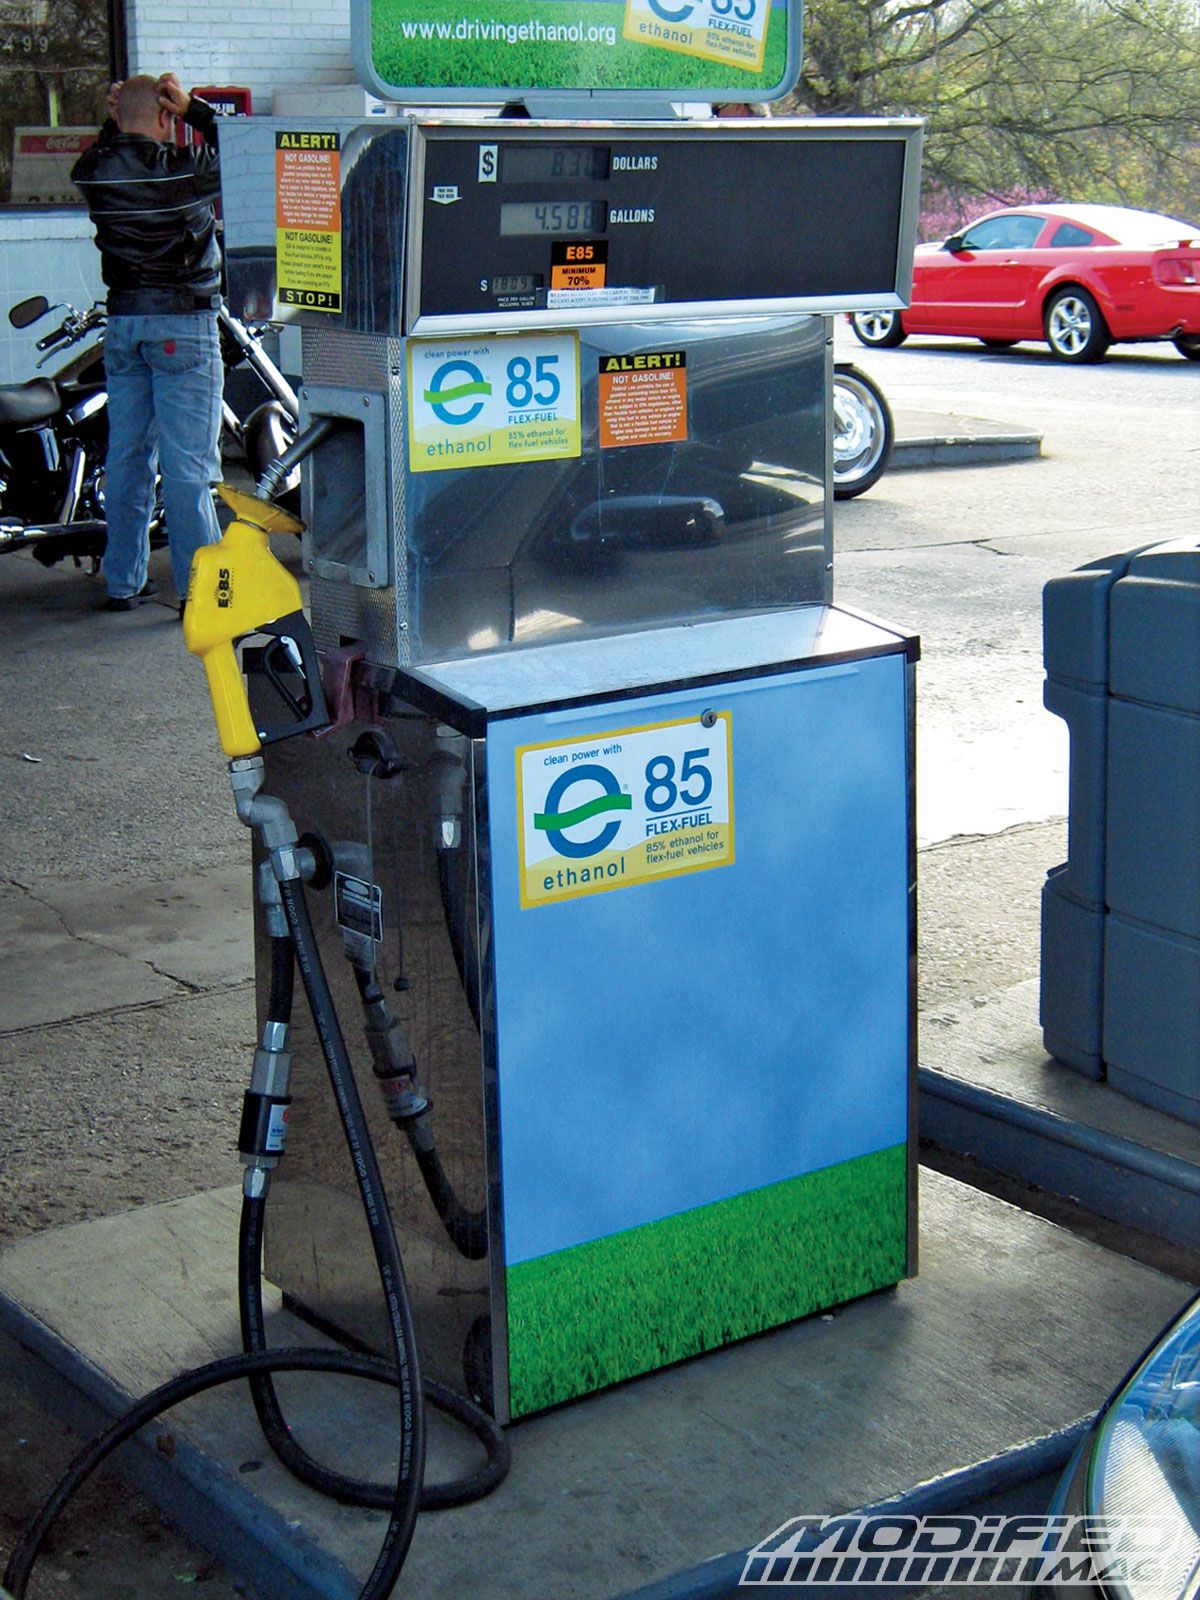 More fed funds for ethanol pumps